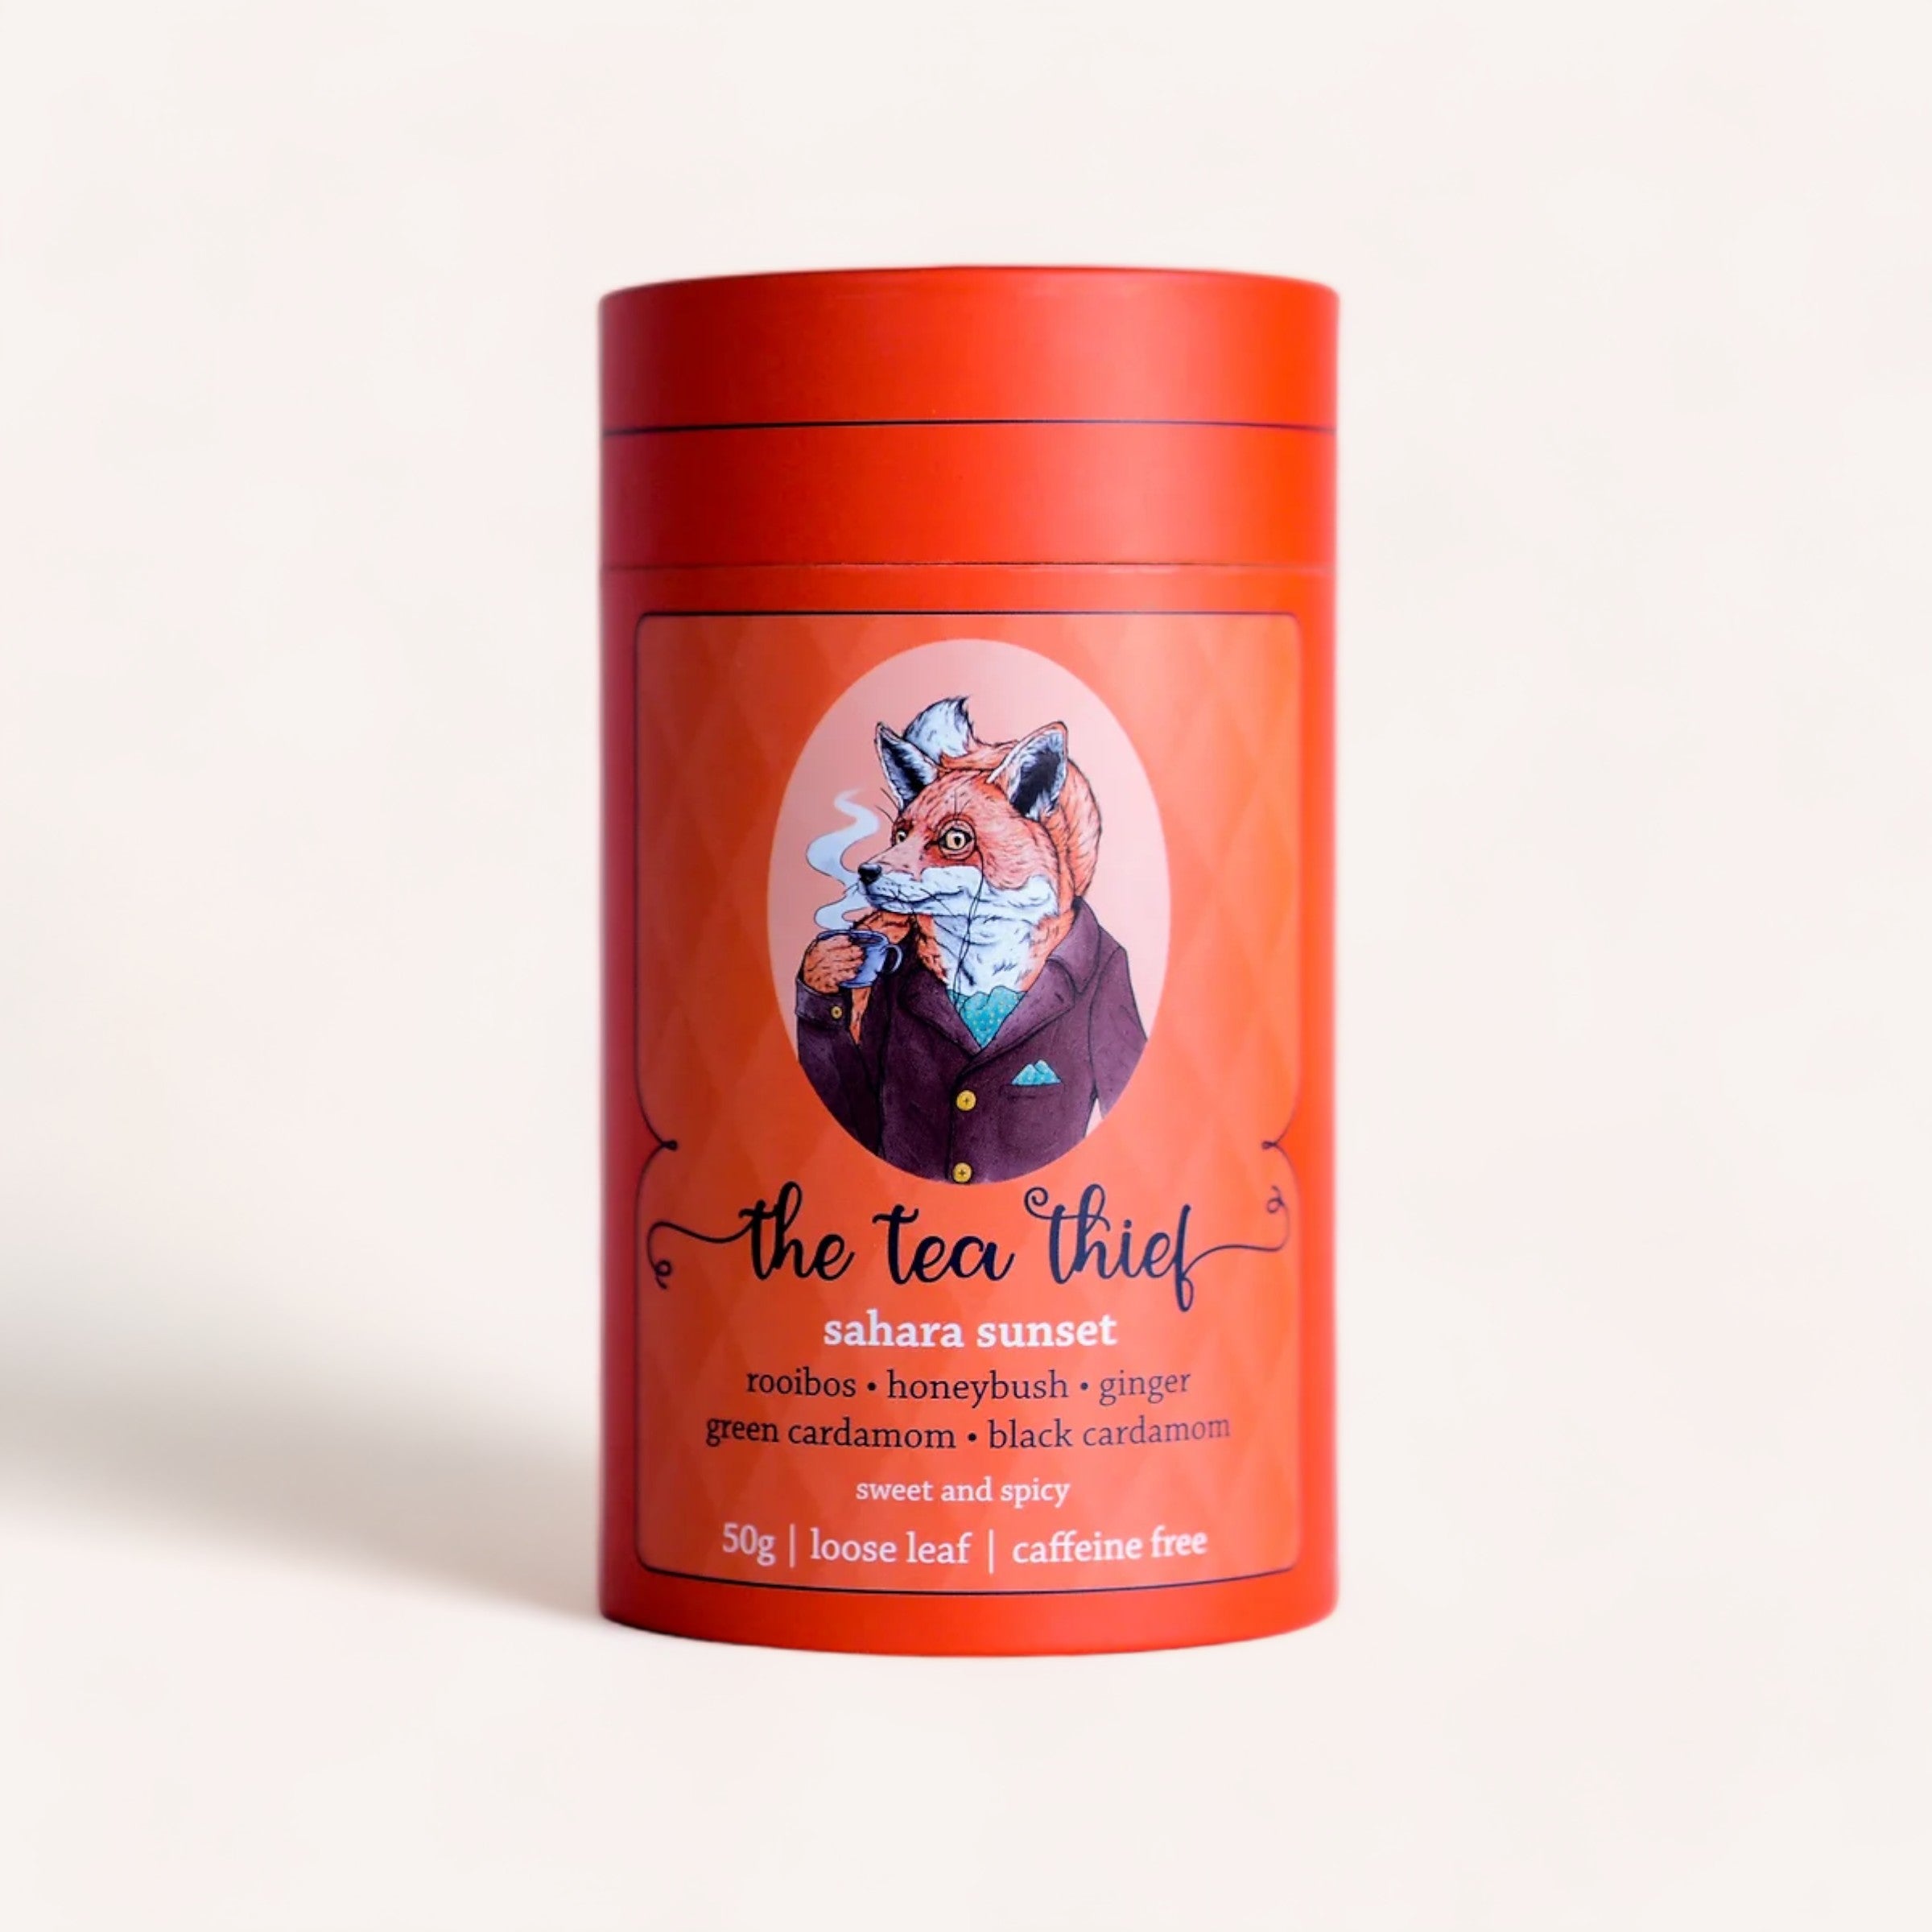 A whimsical tin of "Sahara Sunset 50g by The Tea Thief" loose leaf, caffeine-free tea, featuring rooibos, honeybush, ginger, green cardamom, and.